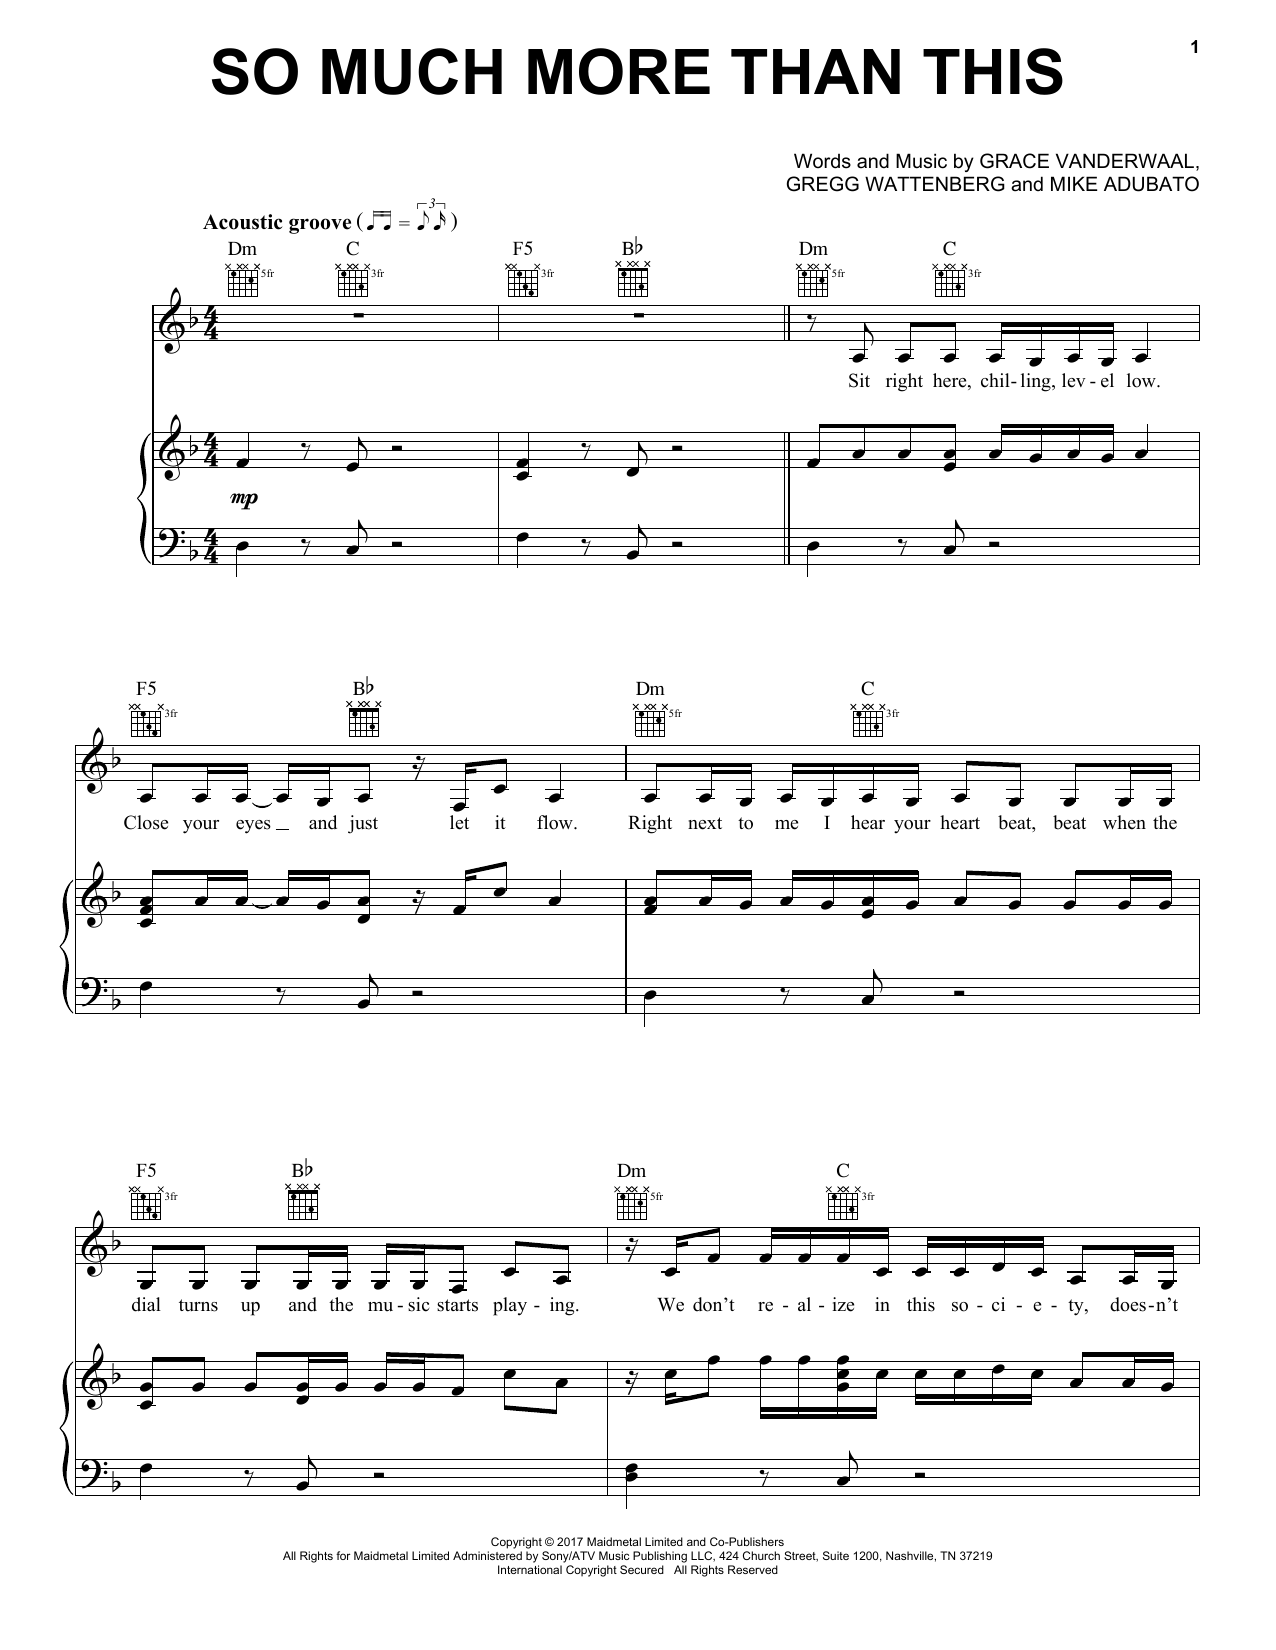 Download Grace VanderWaal So Much More Than This Sheet Music